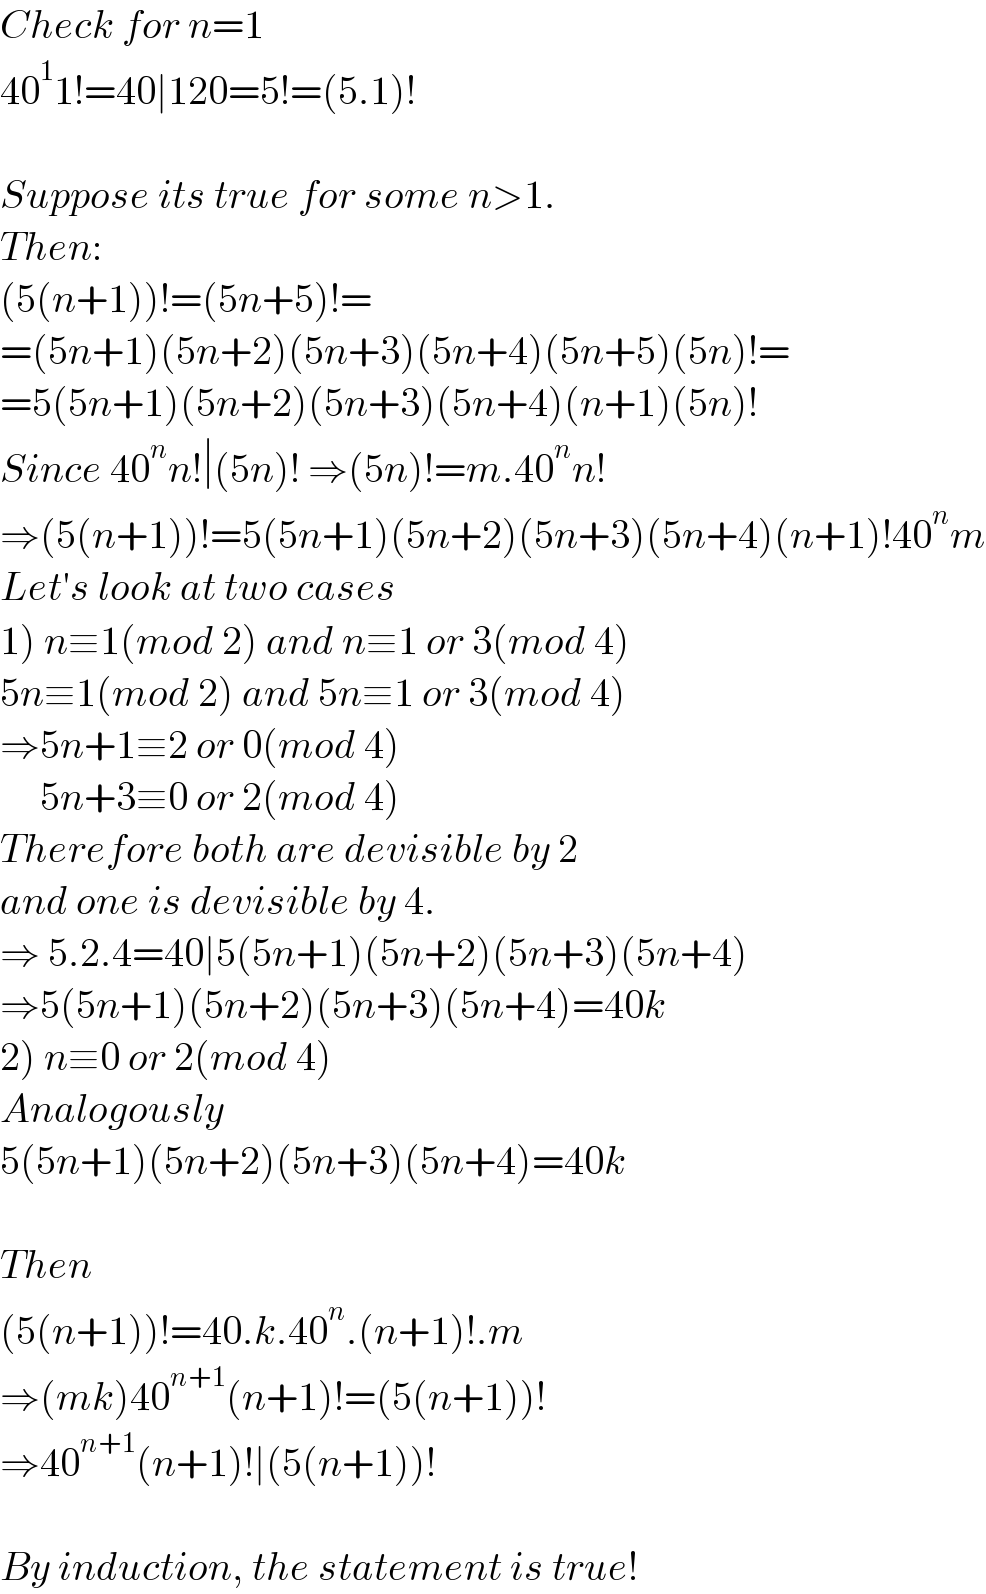 Check for n=1  40^1 1!=40∣120=5!=(5.1)!    Suppose its true for some n>1.  Then:  (5(n+1))!=(5n+5)!=  =(5n+1)(5n+2)(5n+3)(5n+4)(5n+5)(5n)!=  =5(5n+1)(5n+2)(5n+3)(5n+4)(n+1)(5n)!  Since 40^n n!∣(5n)! ⇒(5n)!=m.40^n n!  ⇒(5(n+1))!=5(5n+1)(5n+2)(5n+3)(5n+4)(n+1)!40^n m  Let′s look at two cases  1) n≡1(mod 2) and n≡1 or 3(mod 4)  5n≡1(mod 2) and 5n≡1 or 3(mod 4)  ⇒5n+1≡2 or 0(mod 4)       5n+3≡0 or 2(mod 4)  Therefore both are devisible by 2  and one is devisible by 4.  ⇒ 5.2.4=40∣5(5n+1)(5n+2)(5n+3)(5n+4)  ⇒5(5n+1)(5n+2)(5n+3)(5n+4)=40k  2) n≡0 or 2(mod 4)  Analogously  5(5n+1)(5n+2)(5n+3)(5n+4)=40k    Then  (5(n+1))!=40.k.40^n .(n+1)!.m  ⇒(mk)40^(n+1) (n+1)!=(5(n+1))!  ⇒40^(n+1) (n+1)!∣(5(n+1))!    By induction, the statement is true!  